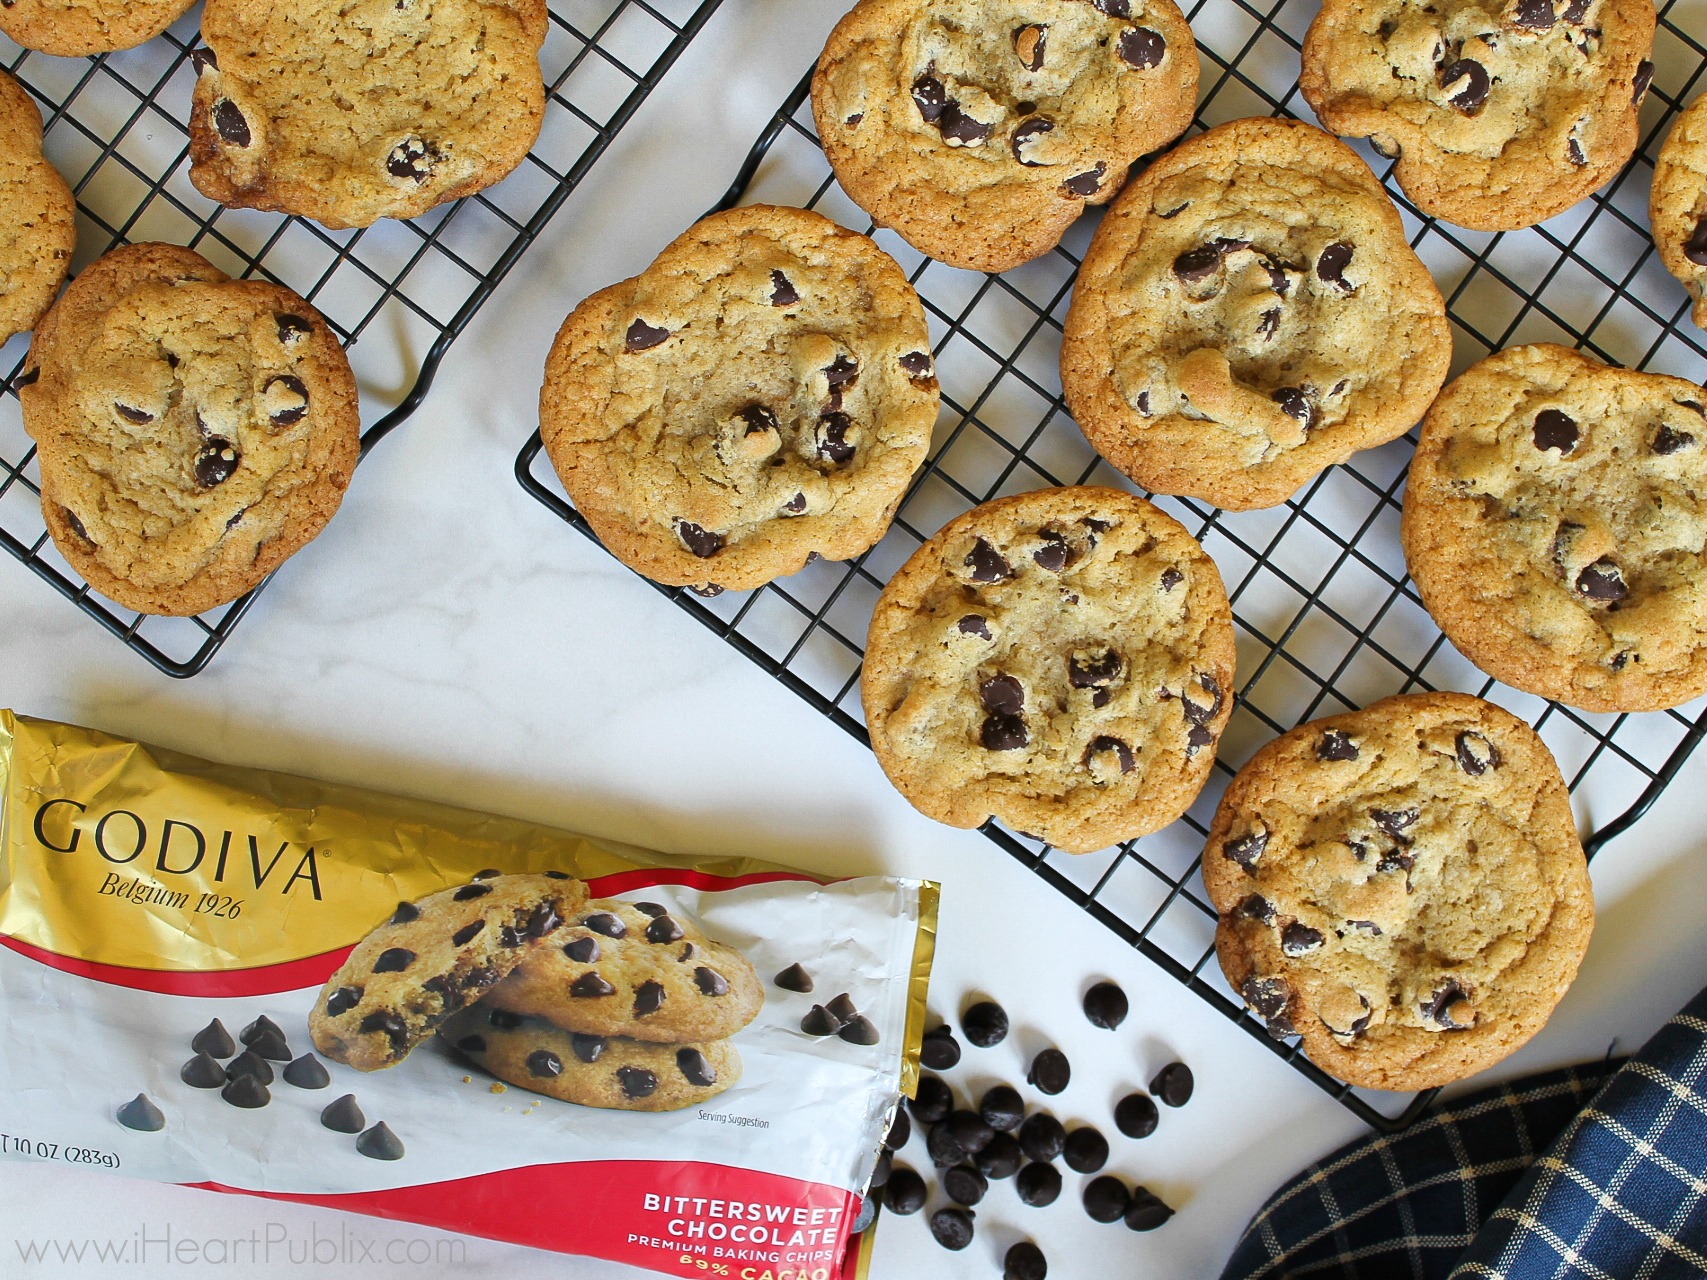 Find New GODIVA Premium Baking Chips At Your Local Publix on I Heart Publix 1